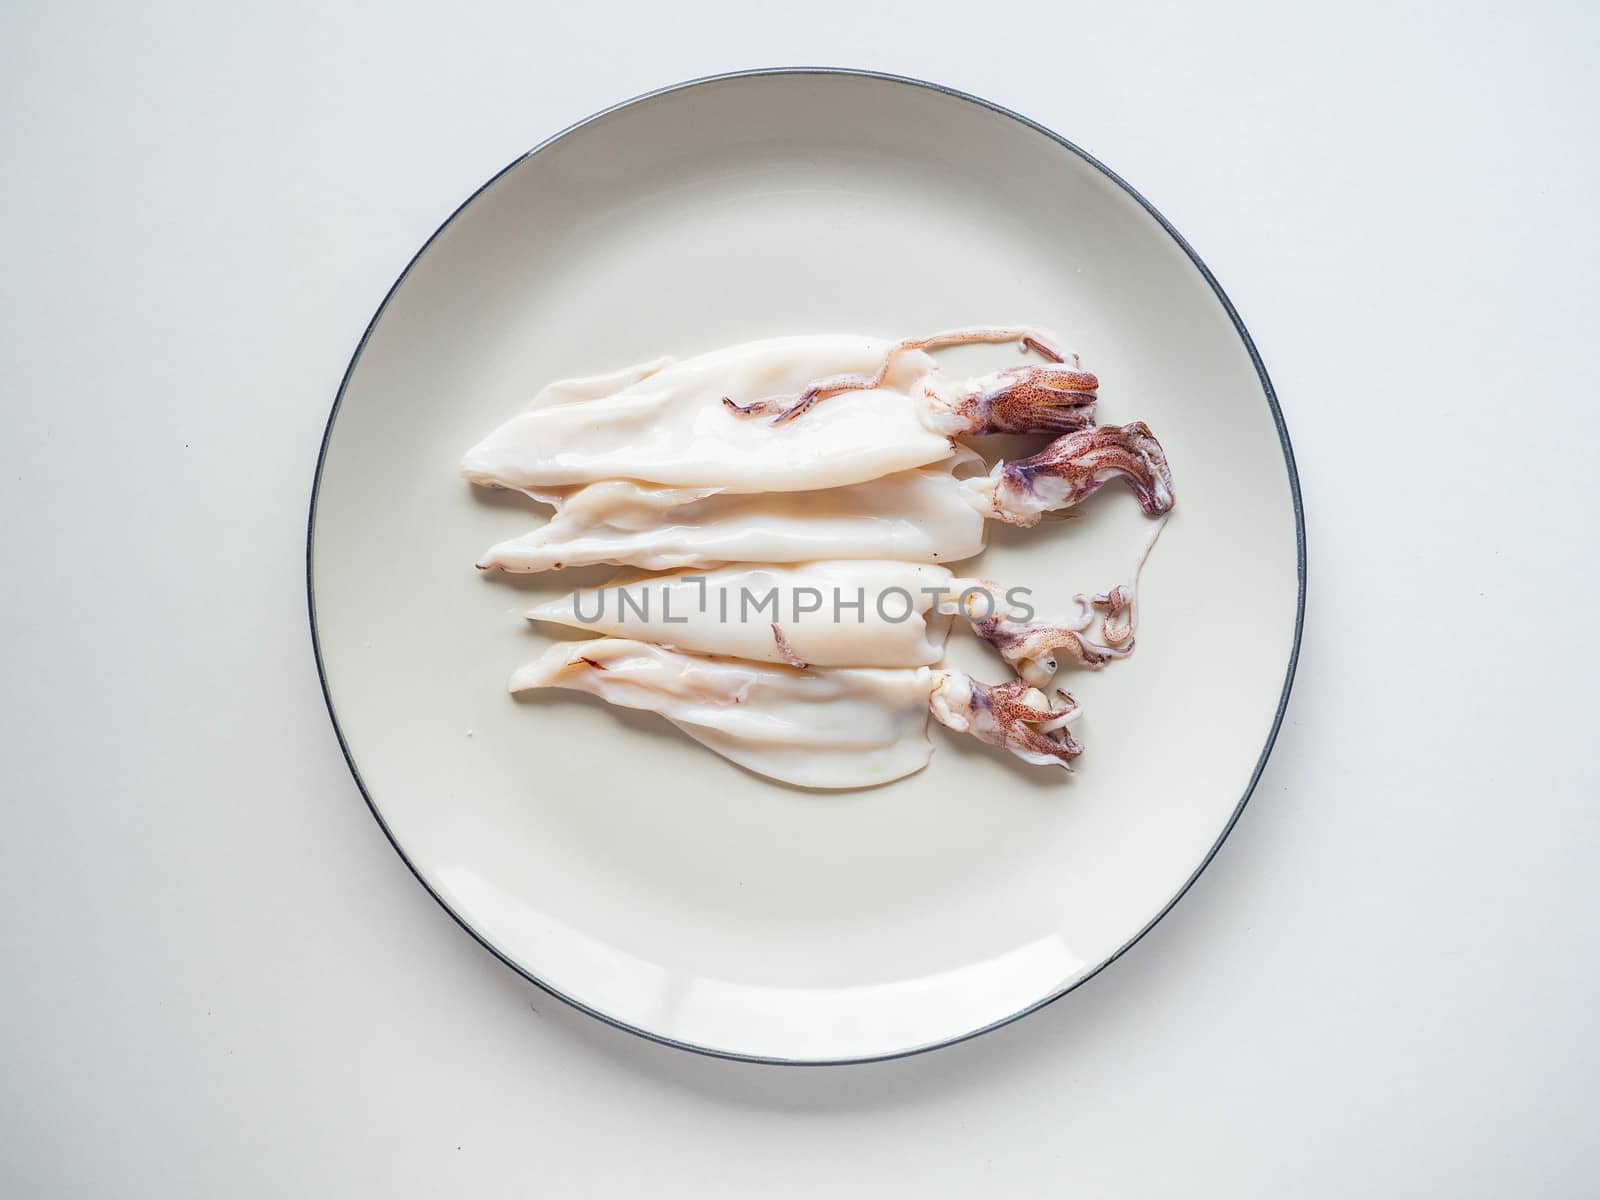 Fresh squid Topping
black pepper from the market on dish White and White background